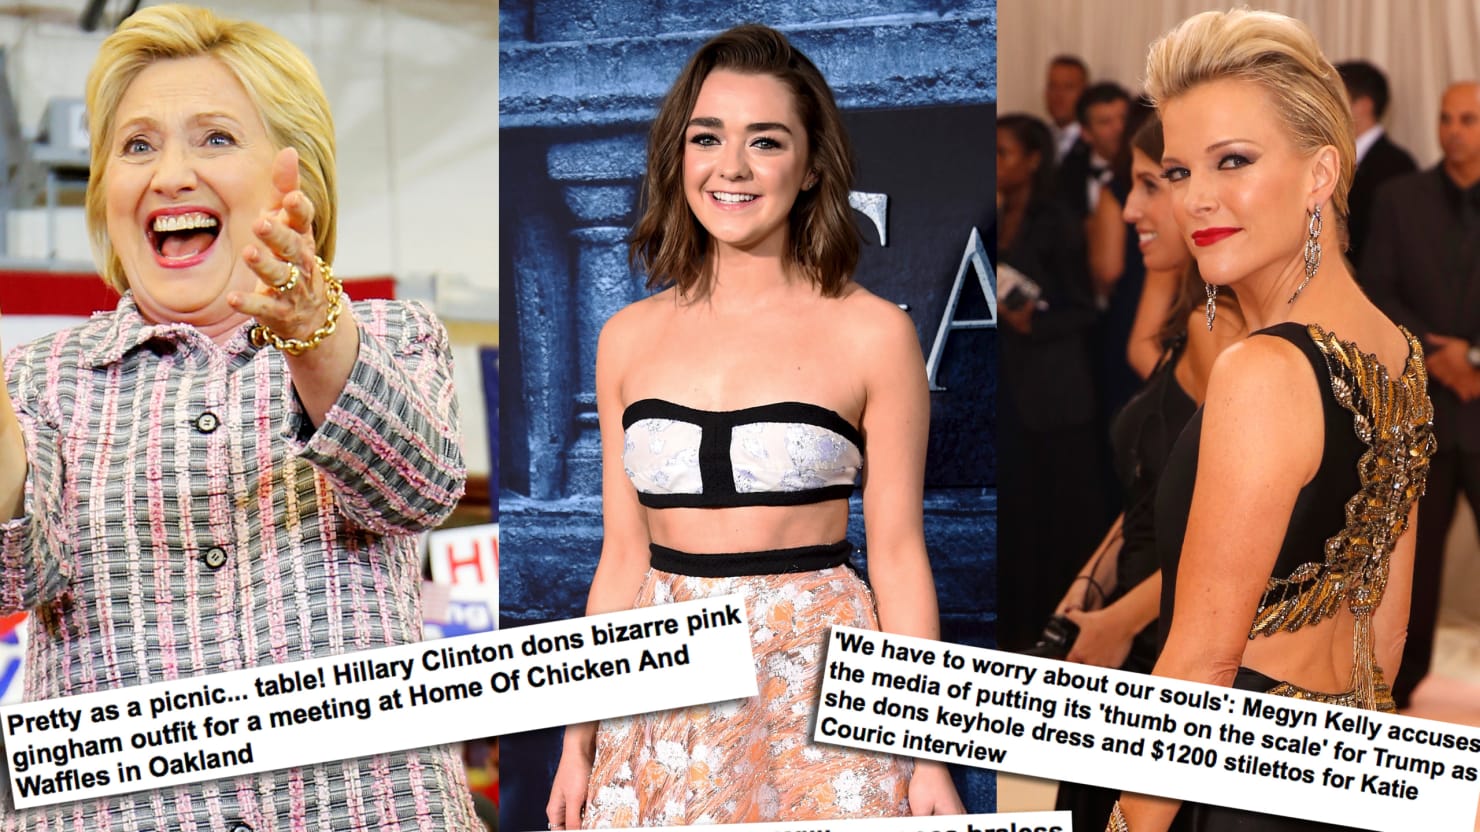 The Daily Mails Sexist Crusade Against Women, from Maisie Williams to Hillary Clinton